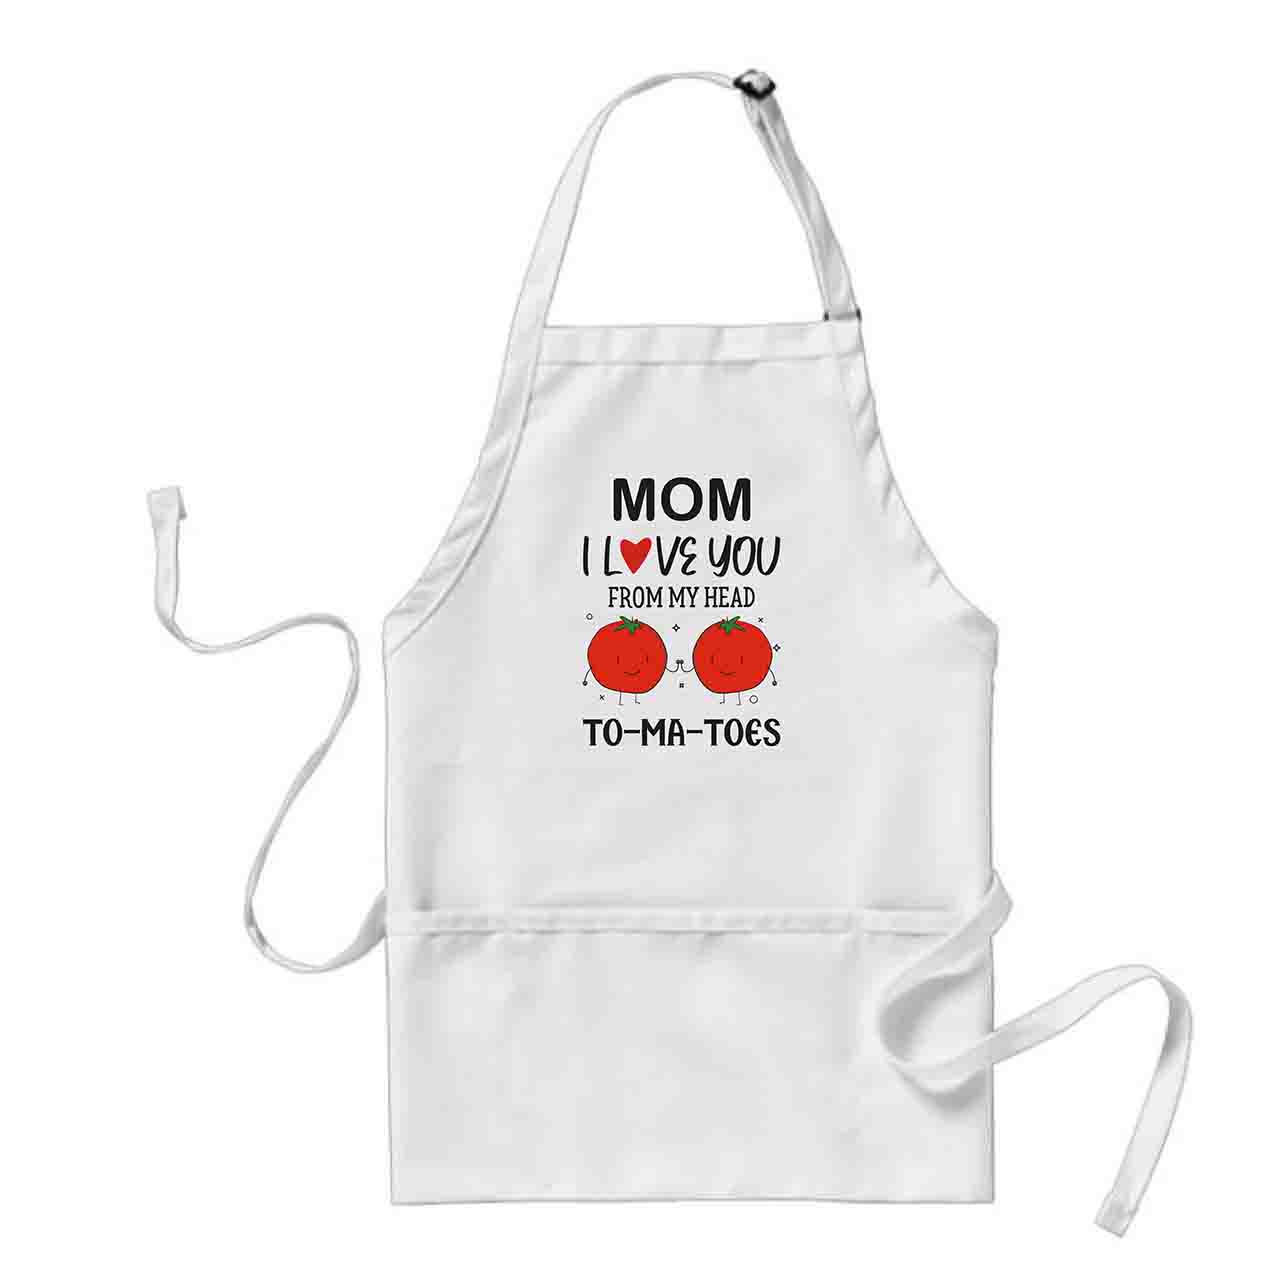 PERSONALIZED APRON GIFT FOR MOM ON MOTHER’S DAY (Design 2)